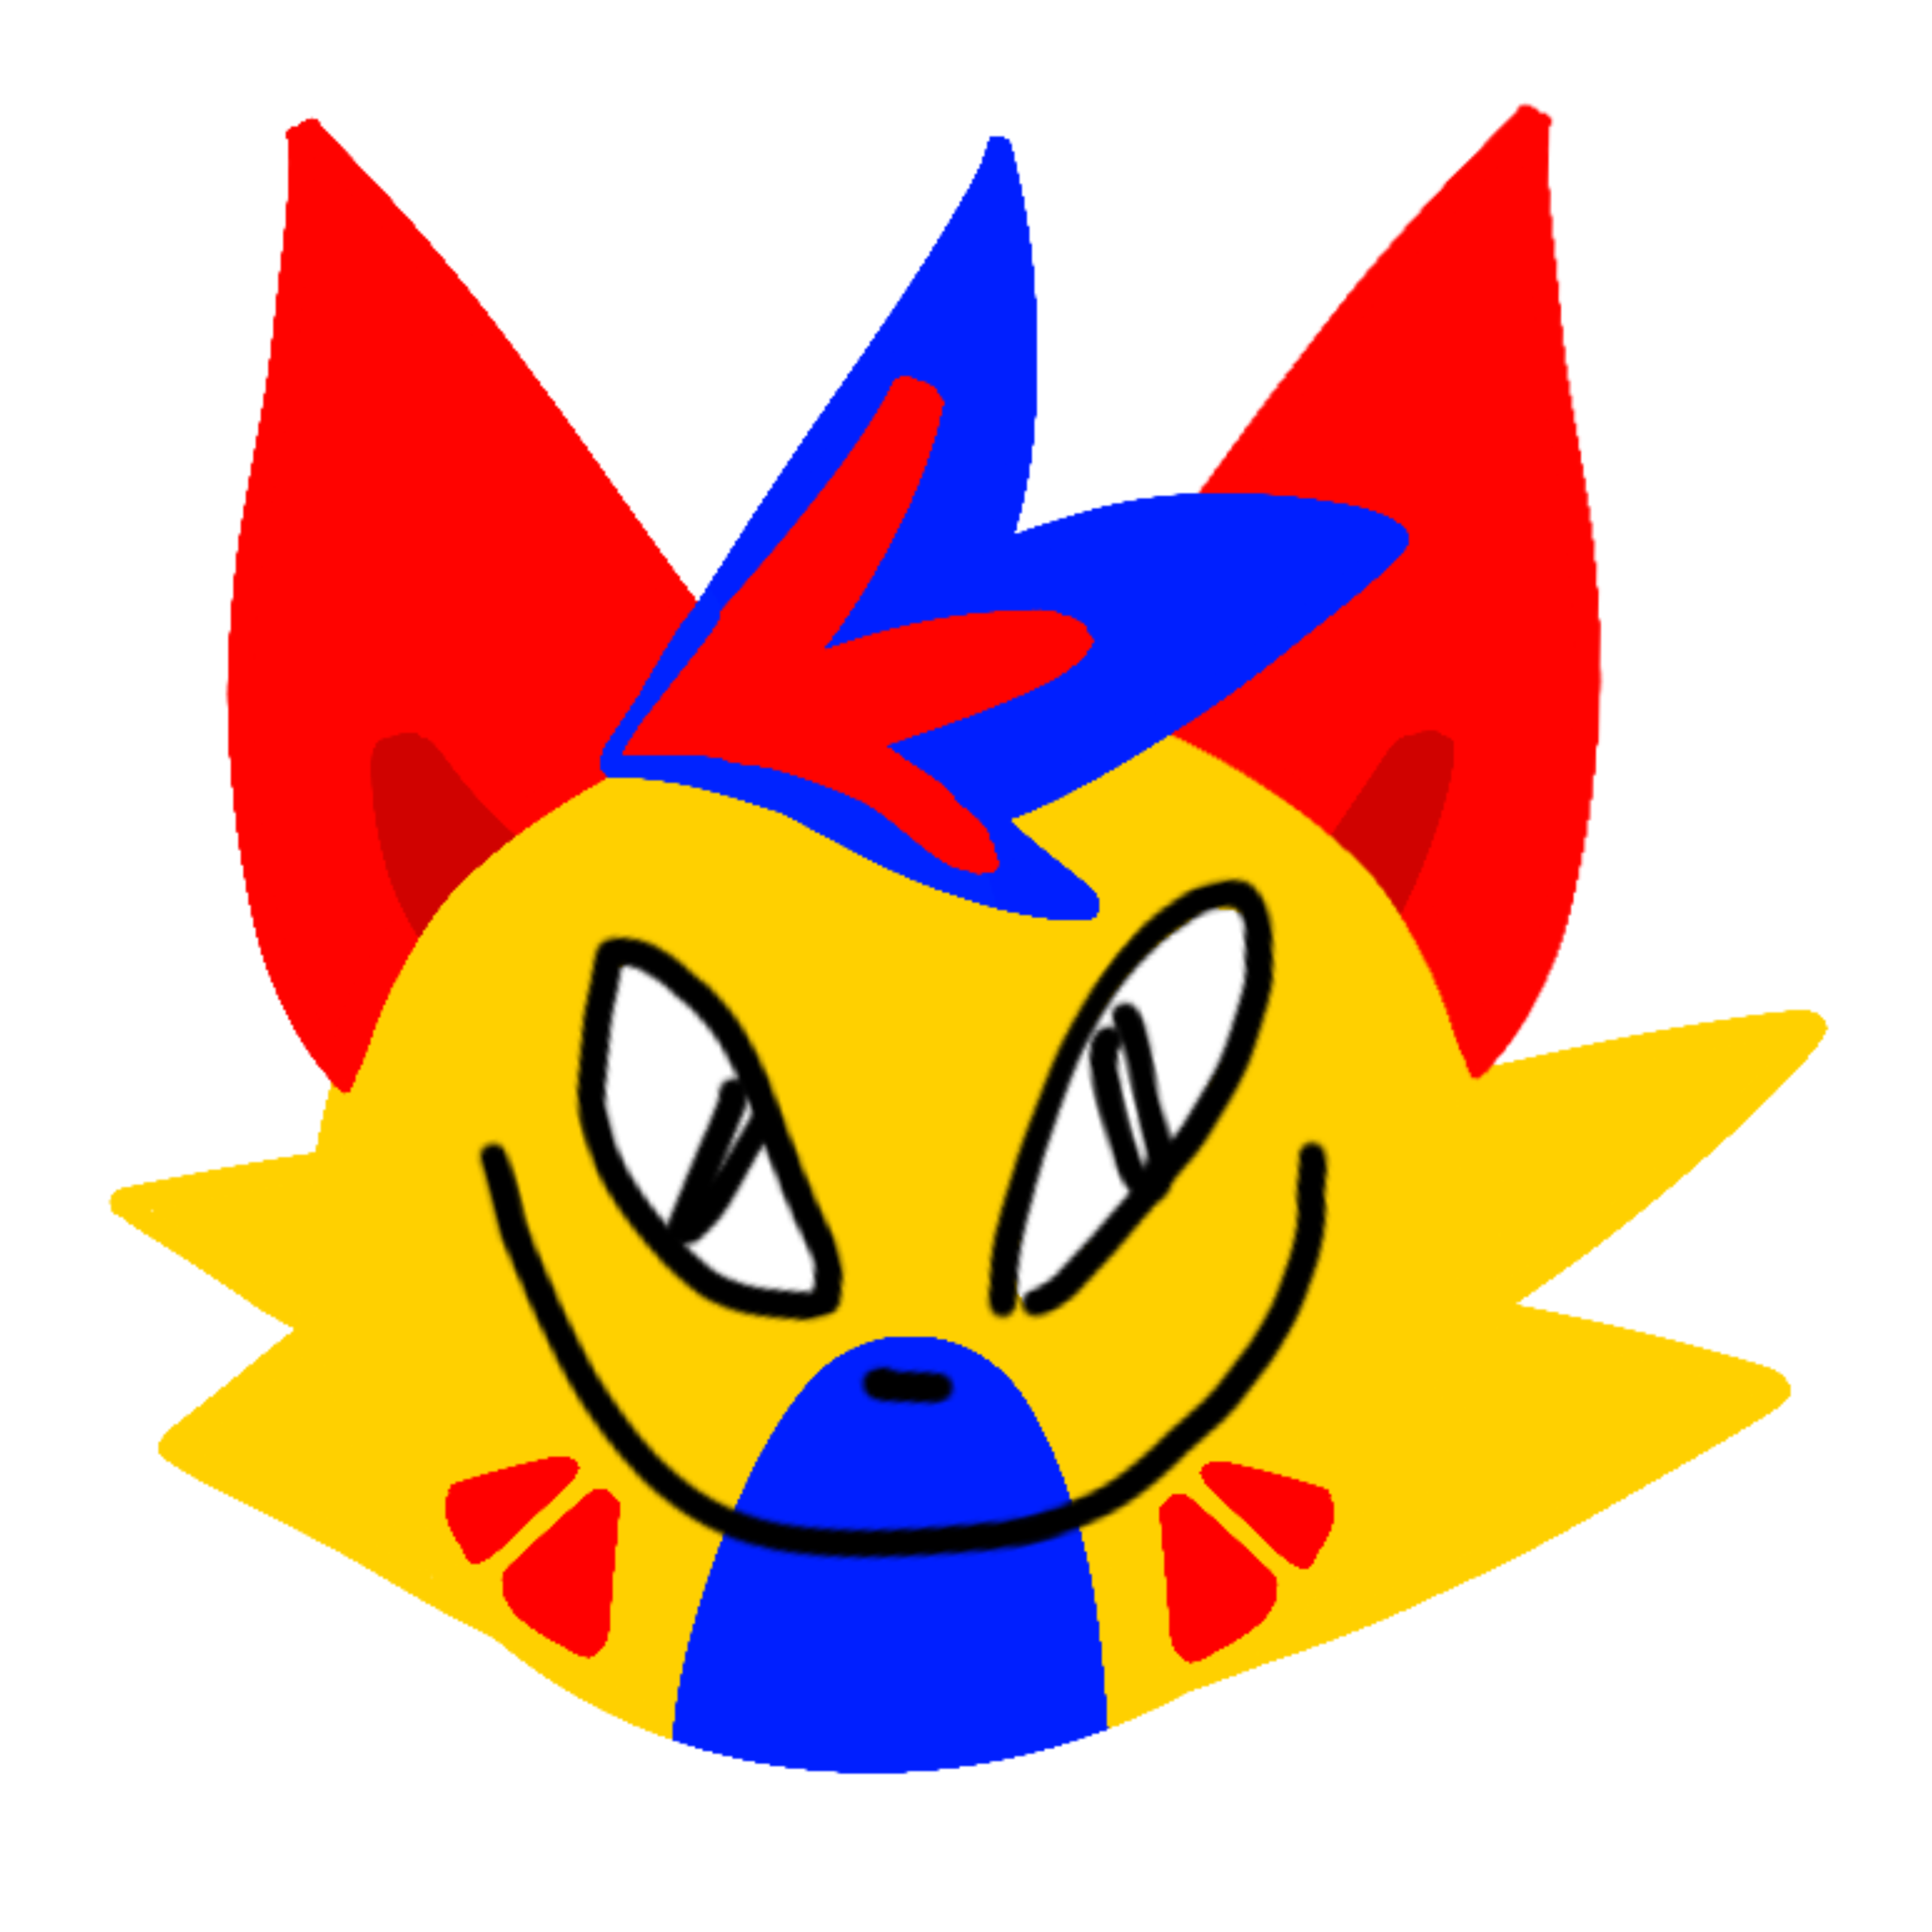 A colorful yellow cartoony style cat's face smiling widely.